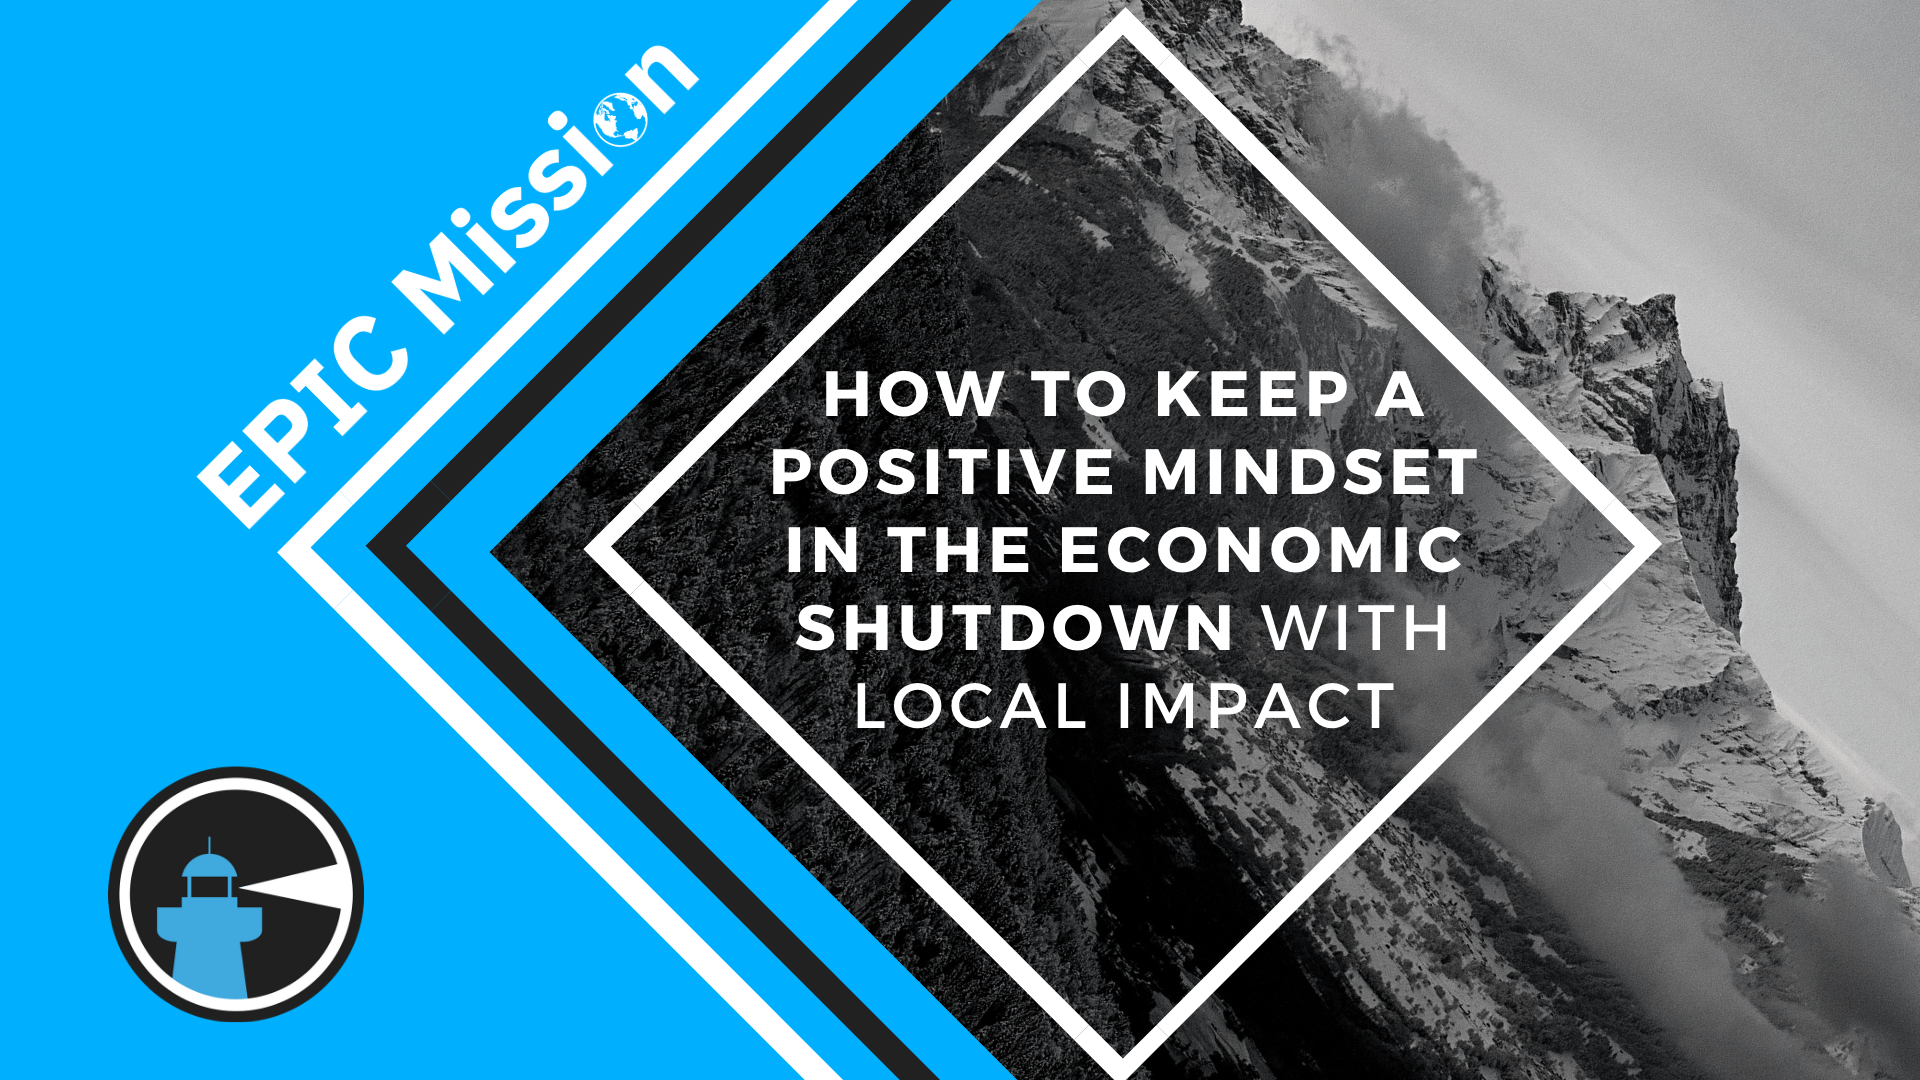 How To Keep A Positive Mindset in the Economic Shutdown with Local Impact